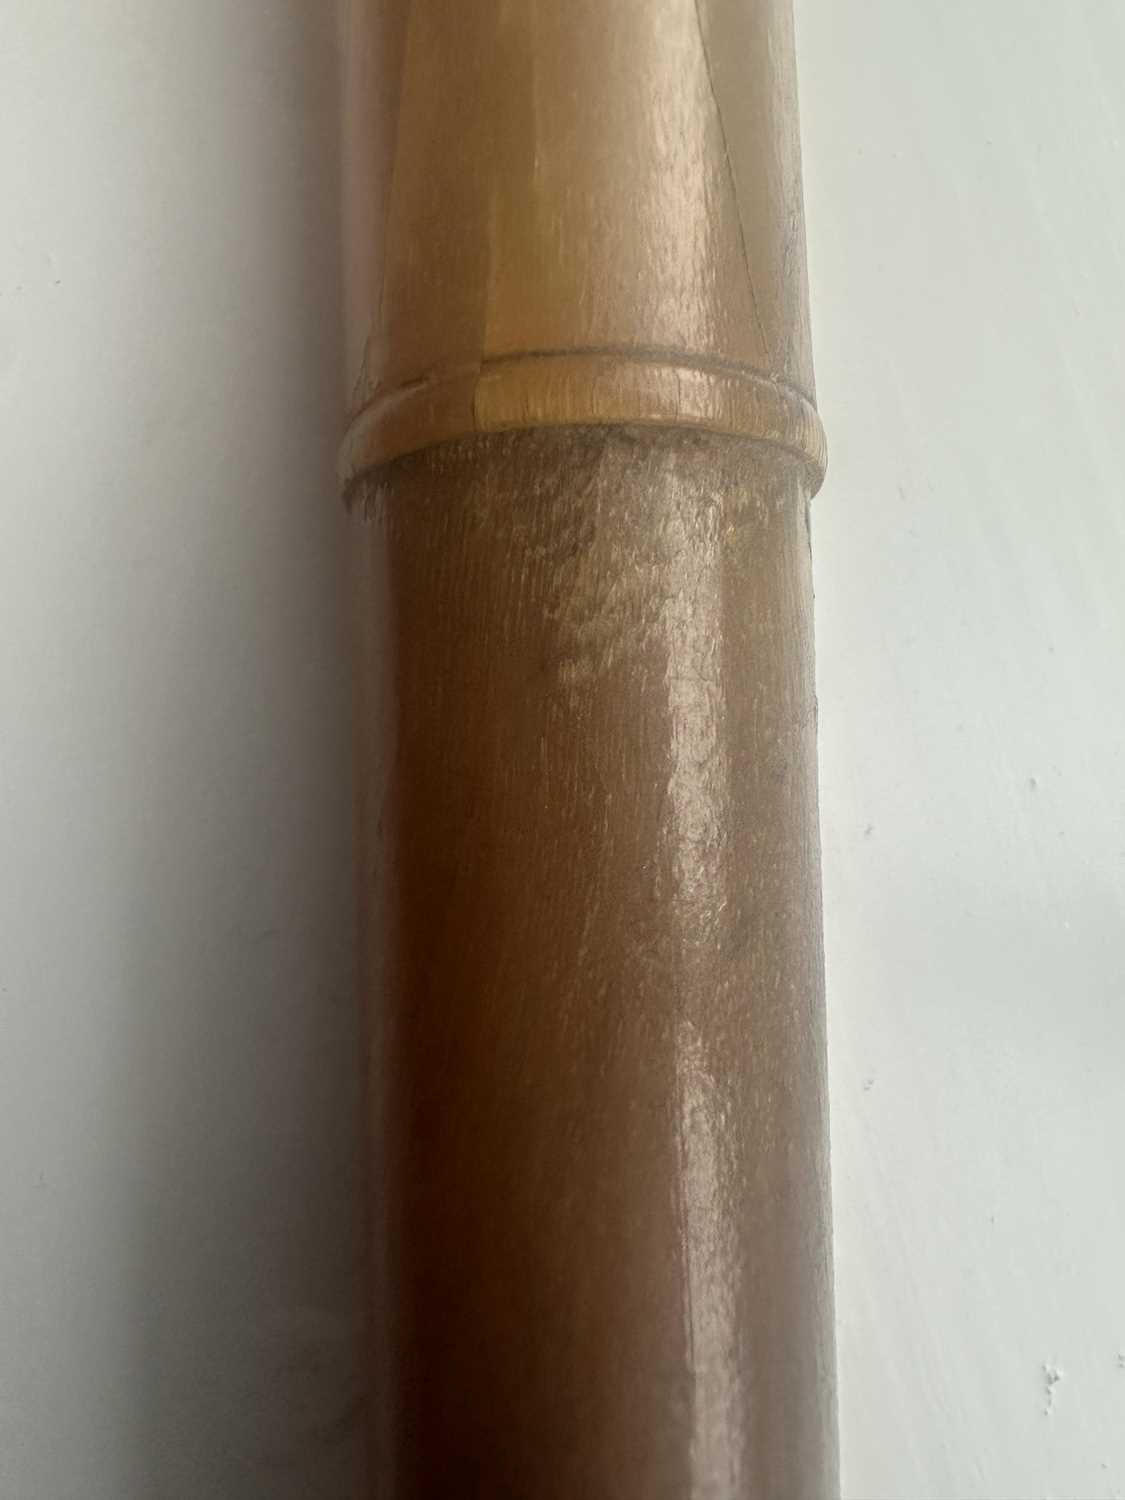 A LATE 19TH CENTURY RHINOCEROS HORN WALKING STICK - Image 10 of 11